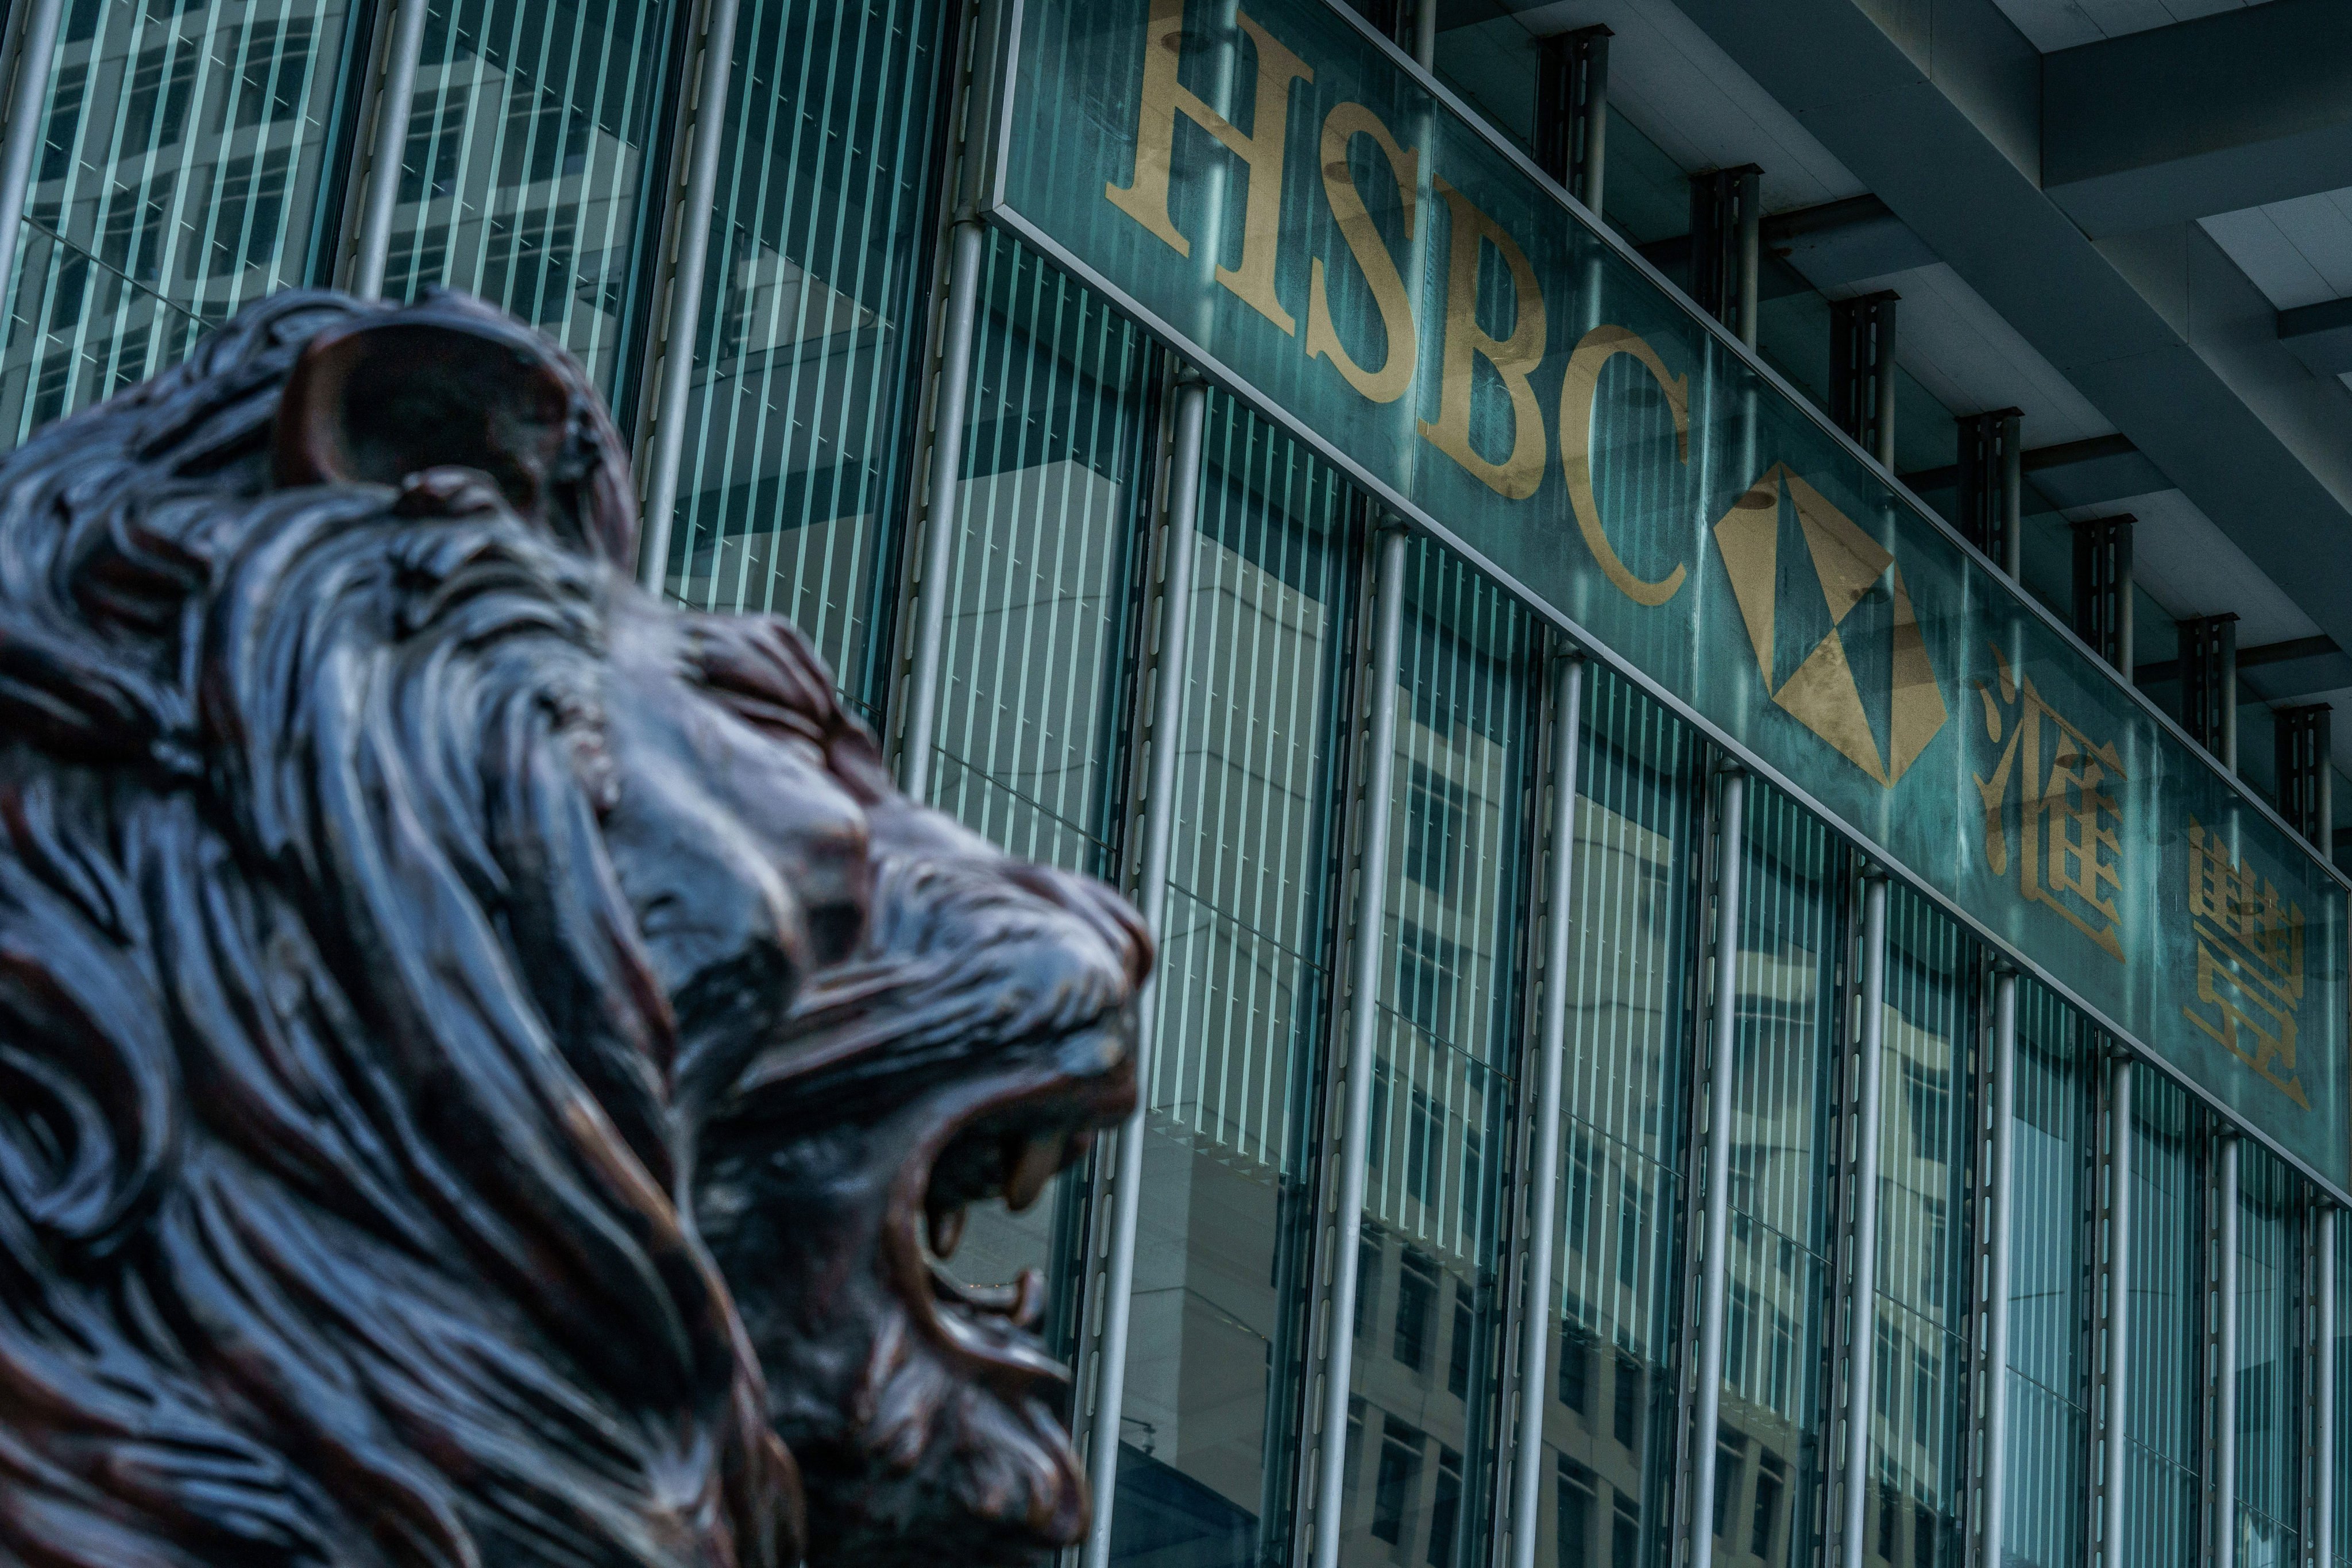 A lion statue outside the HSBC Holdings Plc headquarters building in Hong Kong. Photo: Bloomberg